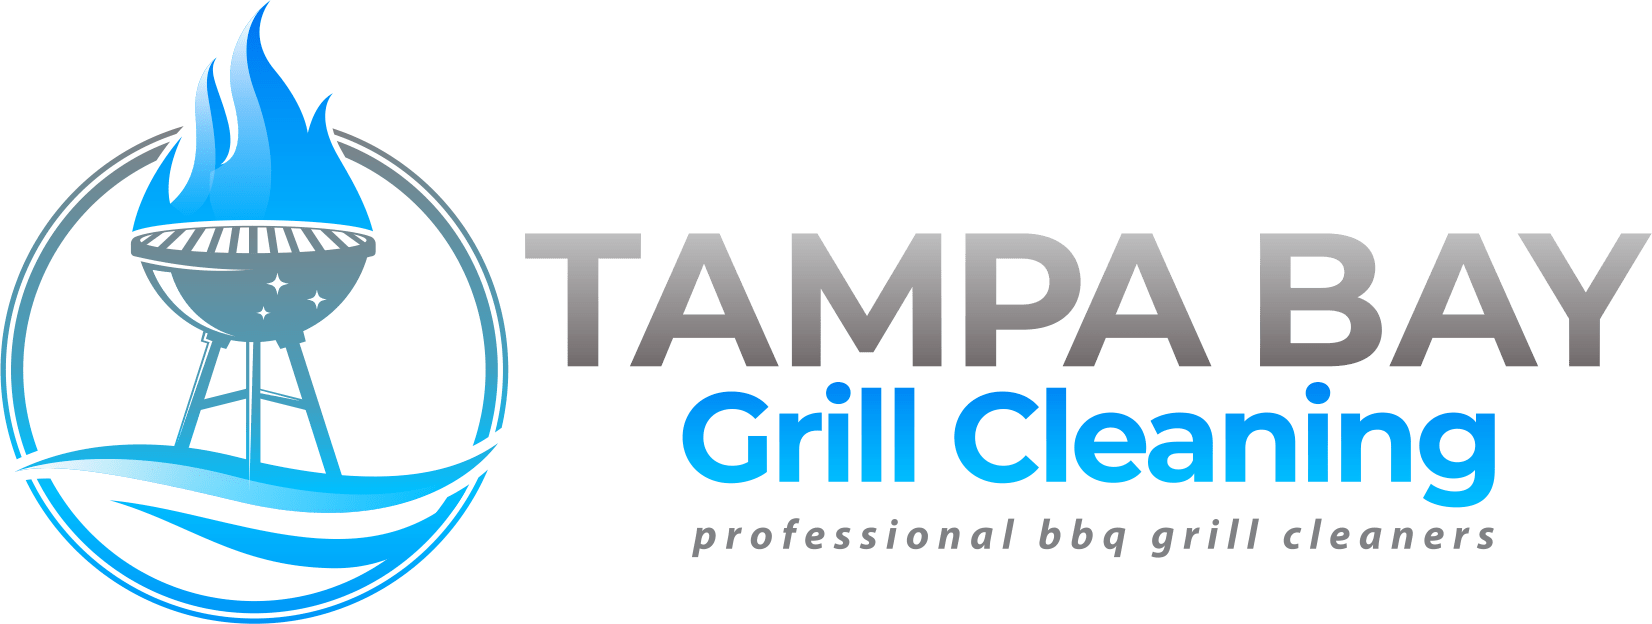 South Bay Grill Cleaning